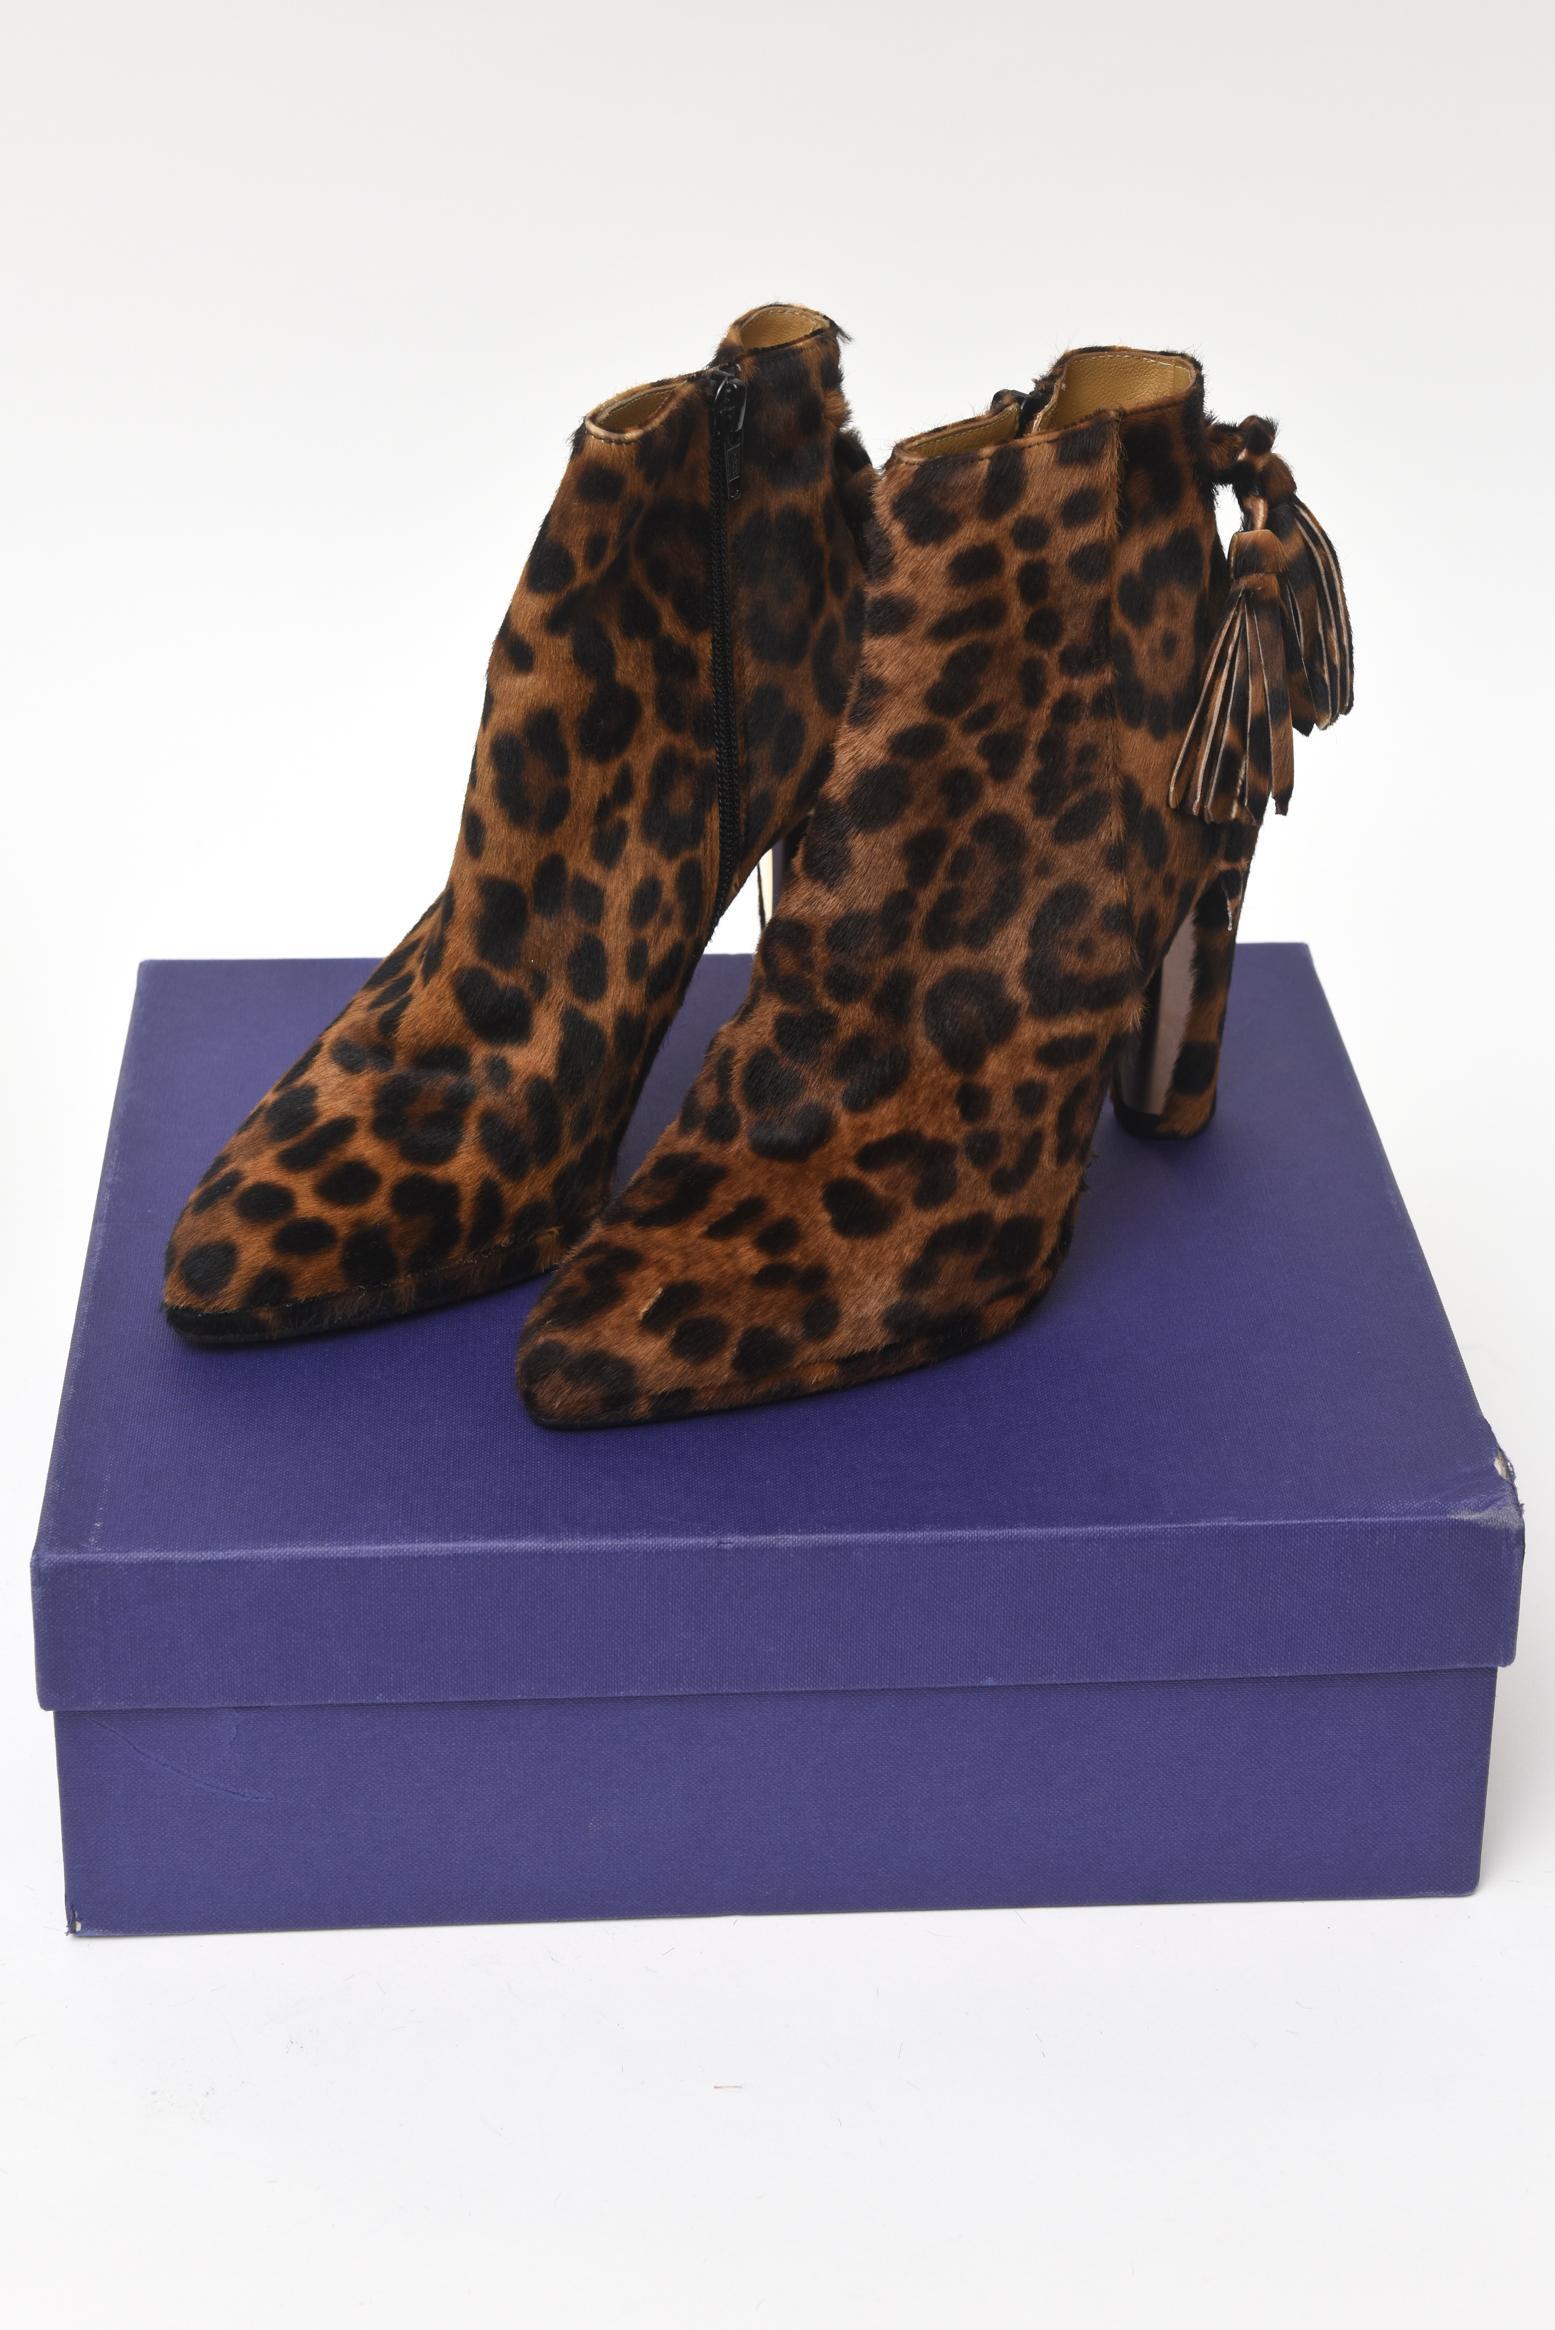 Stuart Weitzman Leopard Pony Hair Ankle Boots With Gold Heel For Sale 1